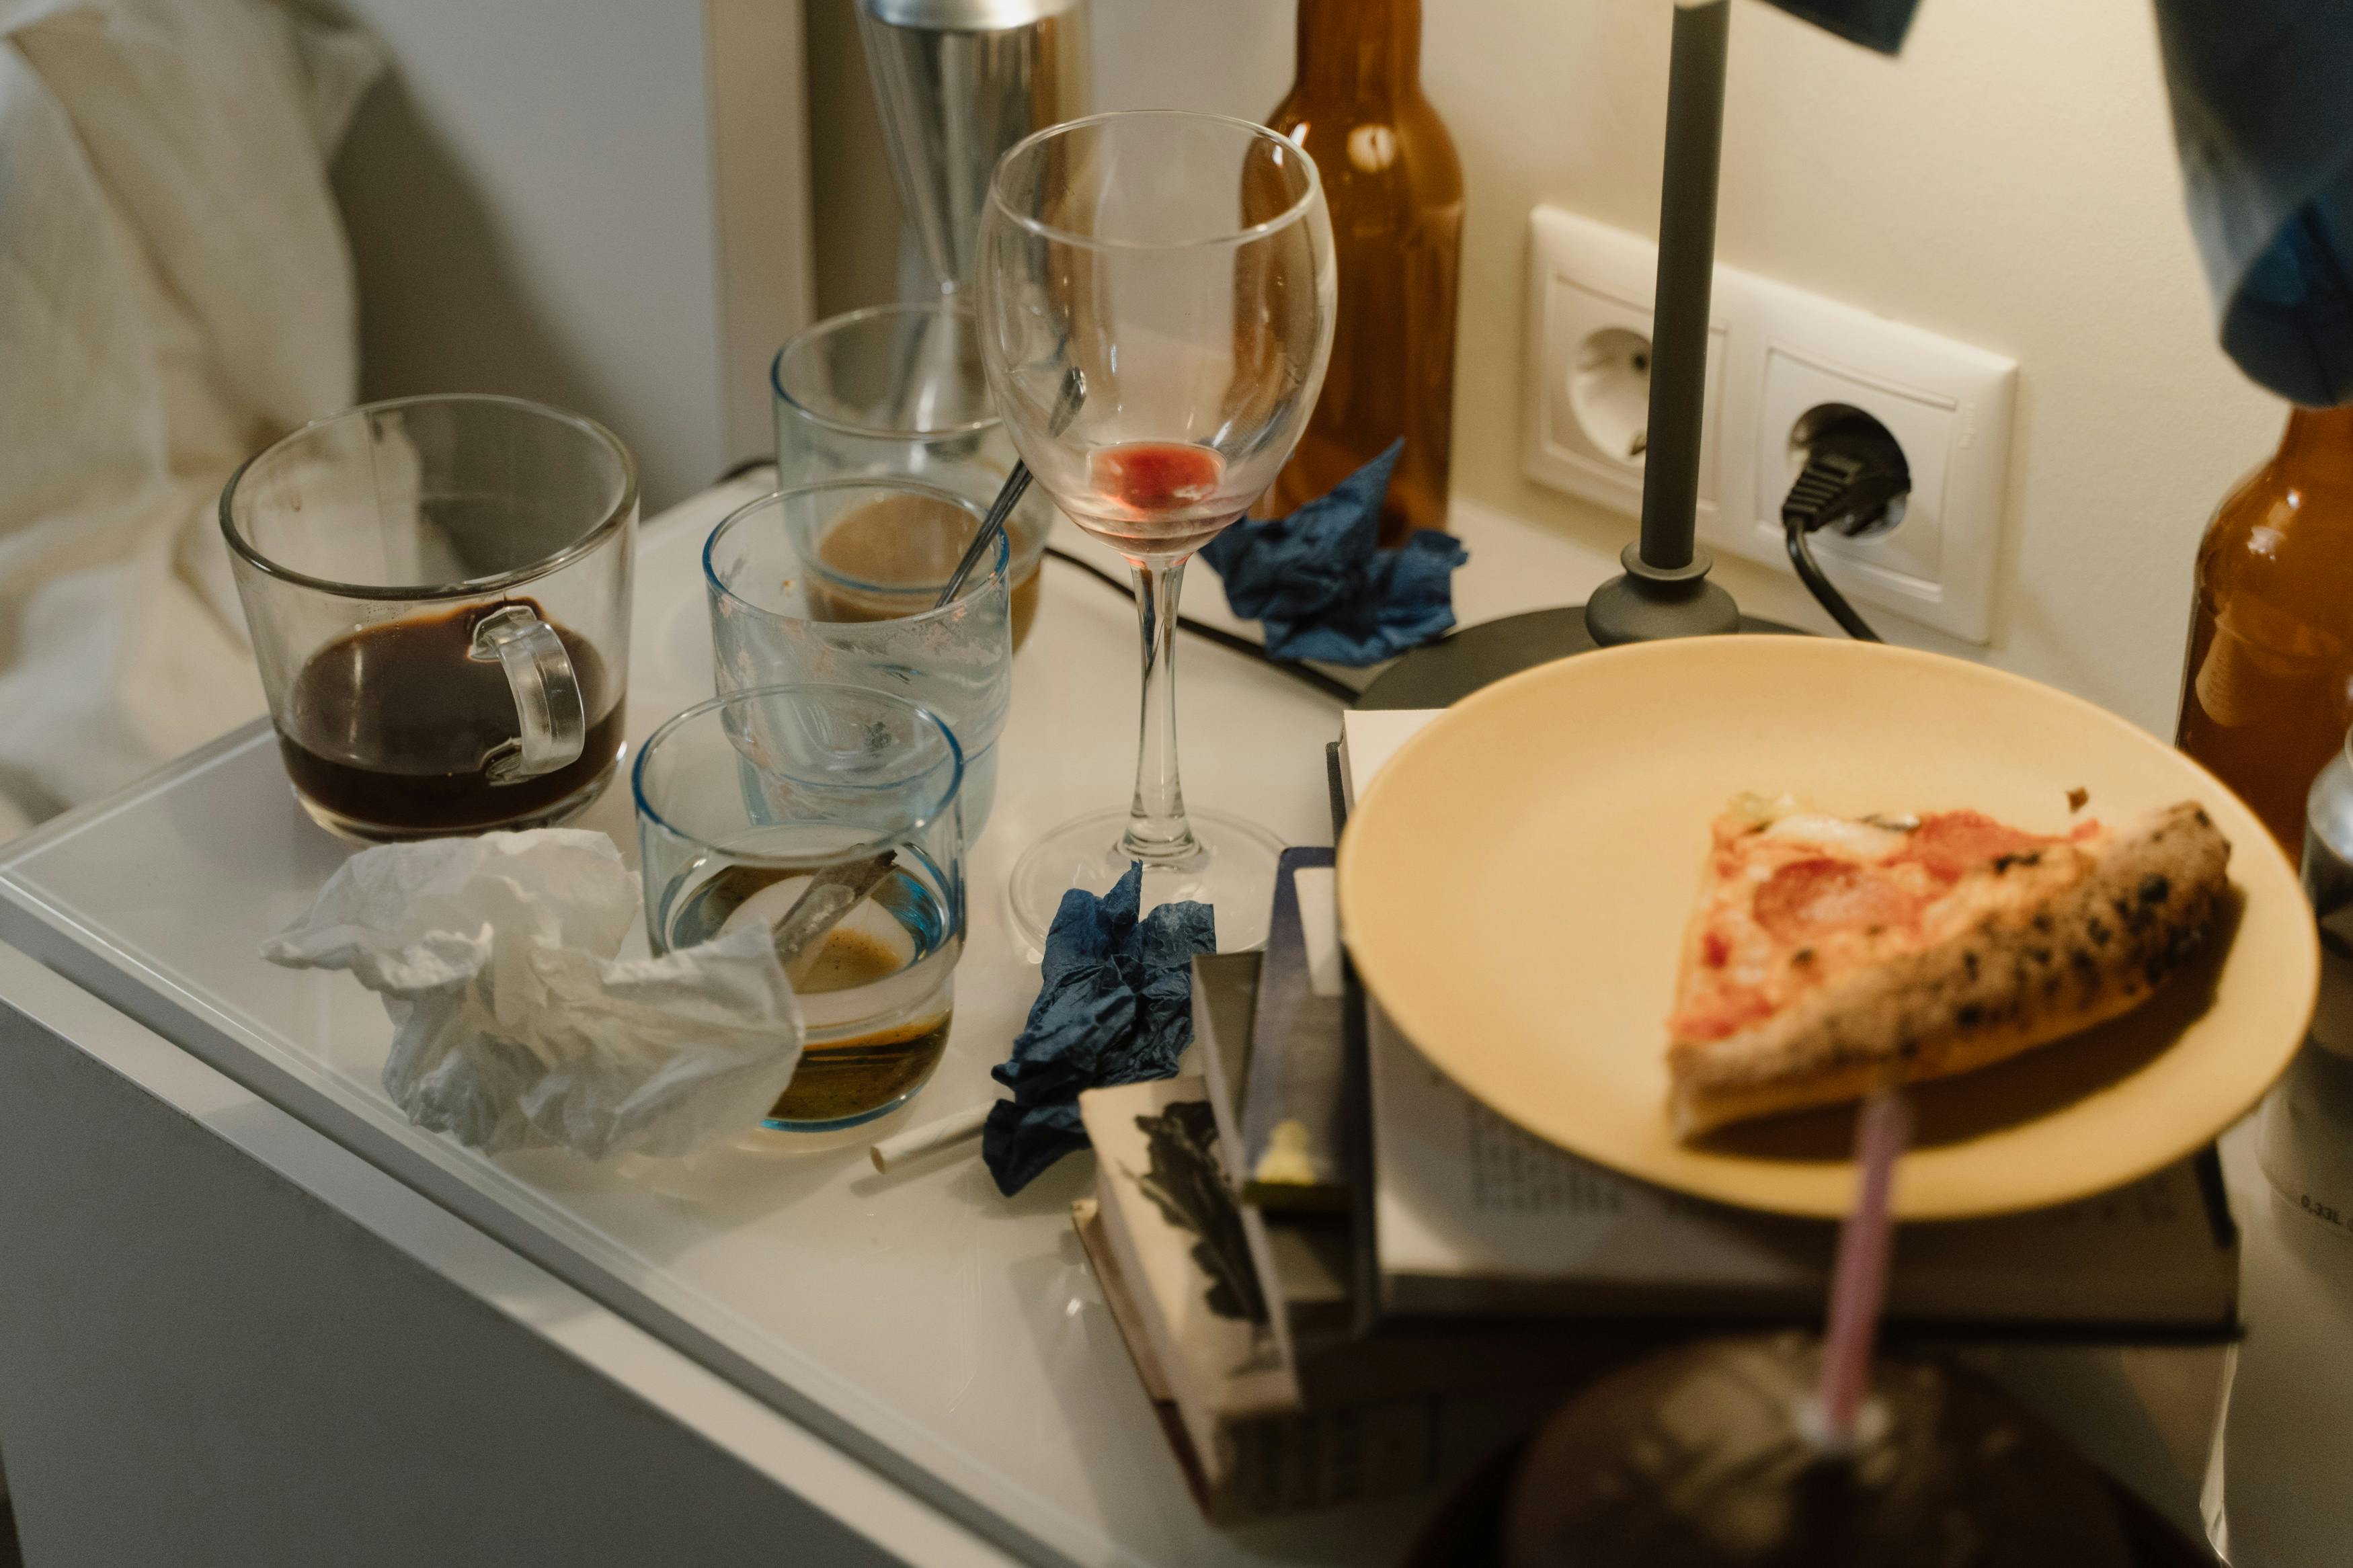 A dirty kitchen with used plates, glasses, and mugs | Source: Pexels